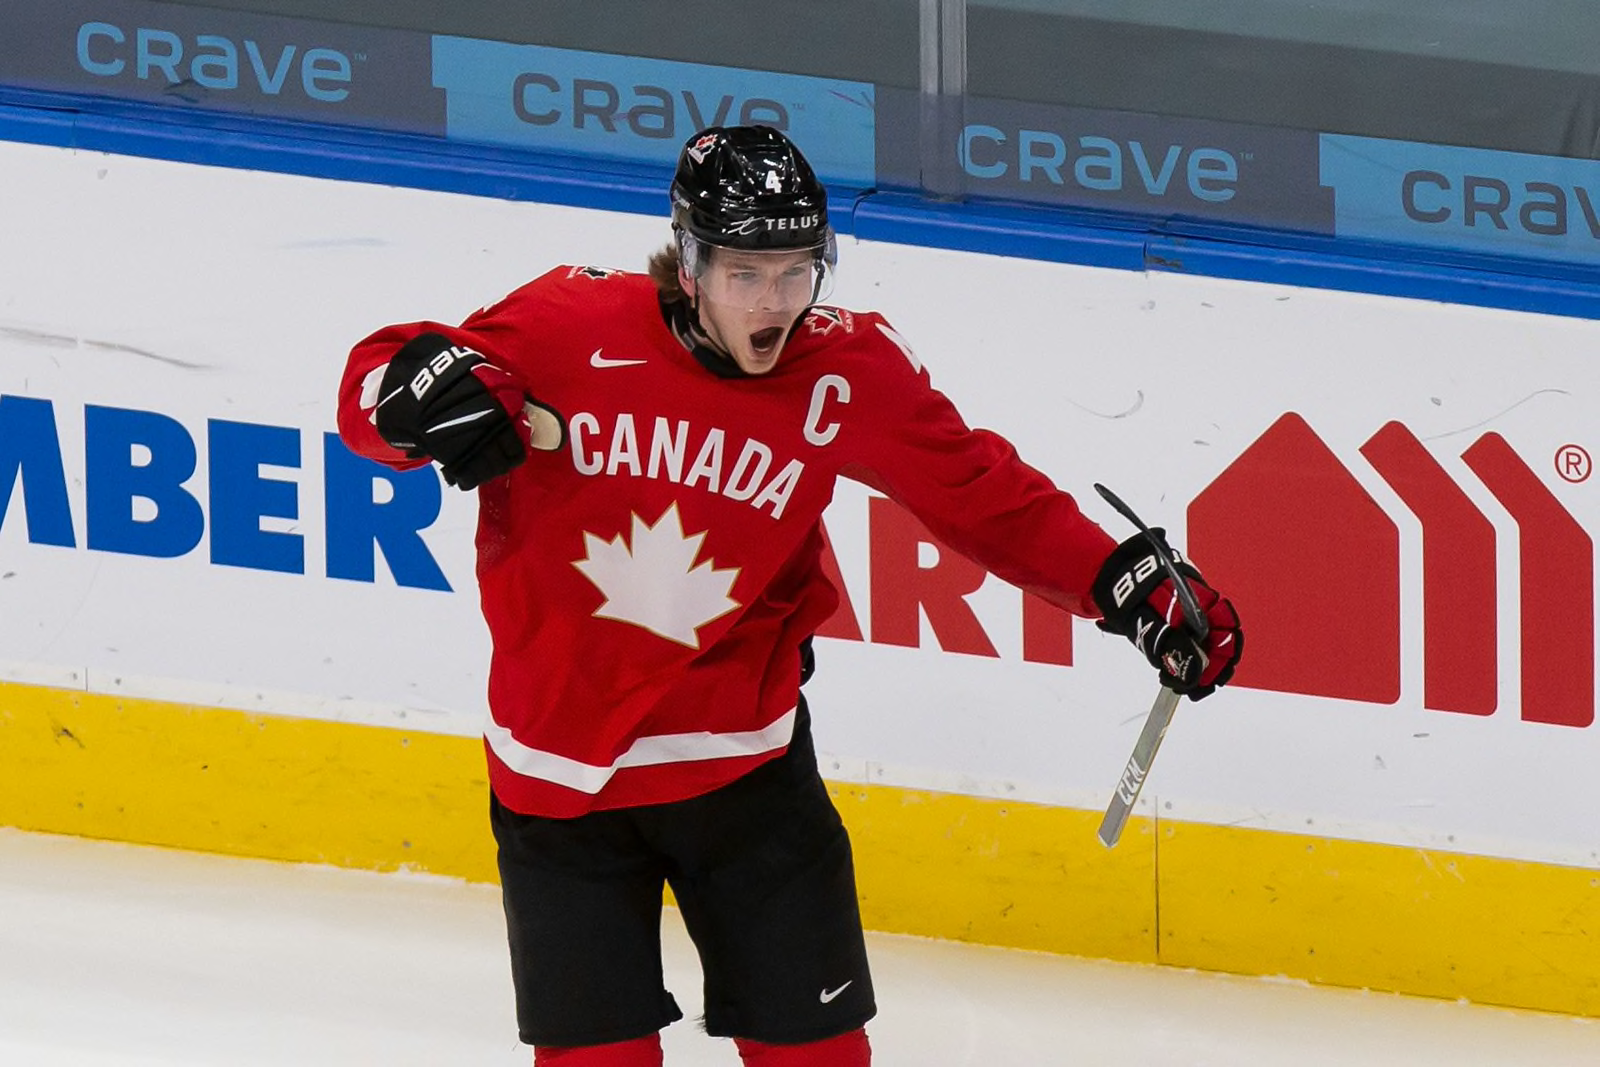 2021 WJC Three Storylines to watch unfold during Semi-Final games